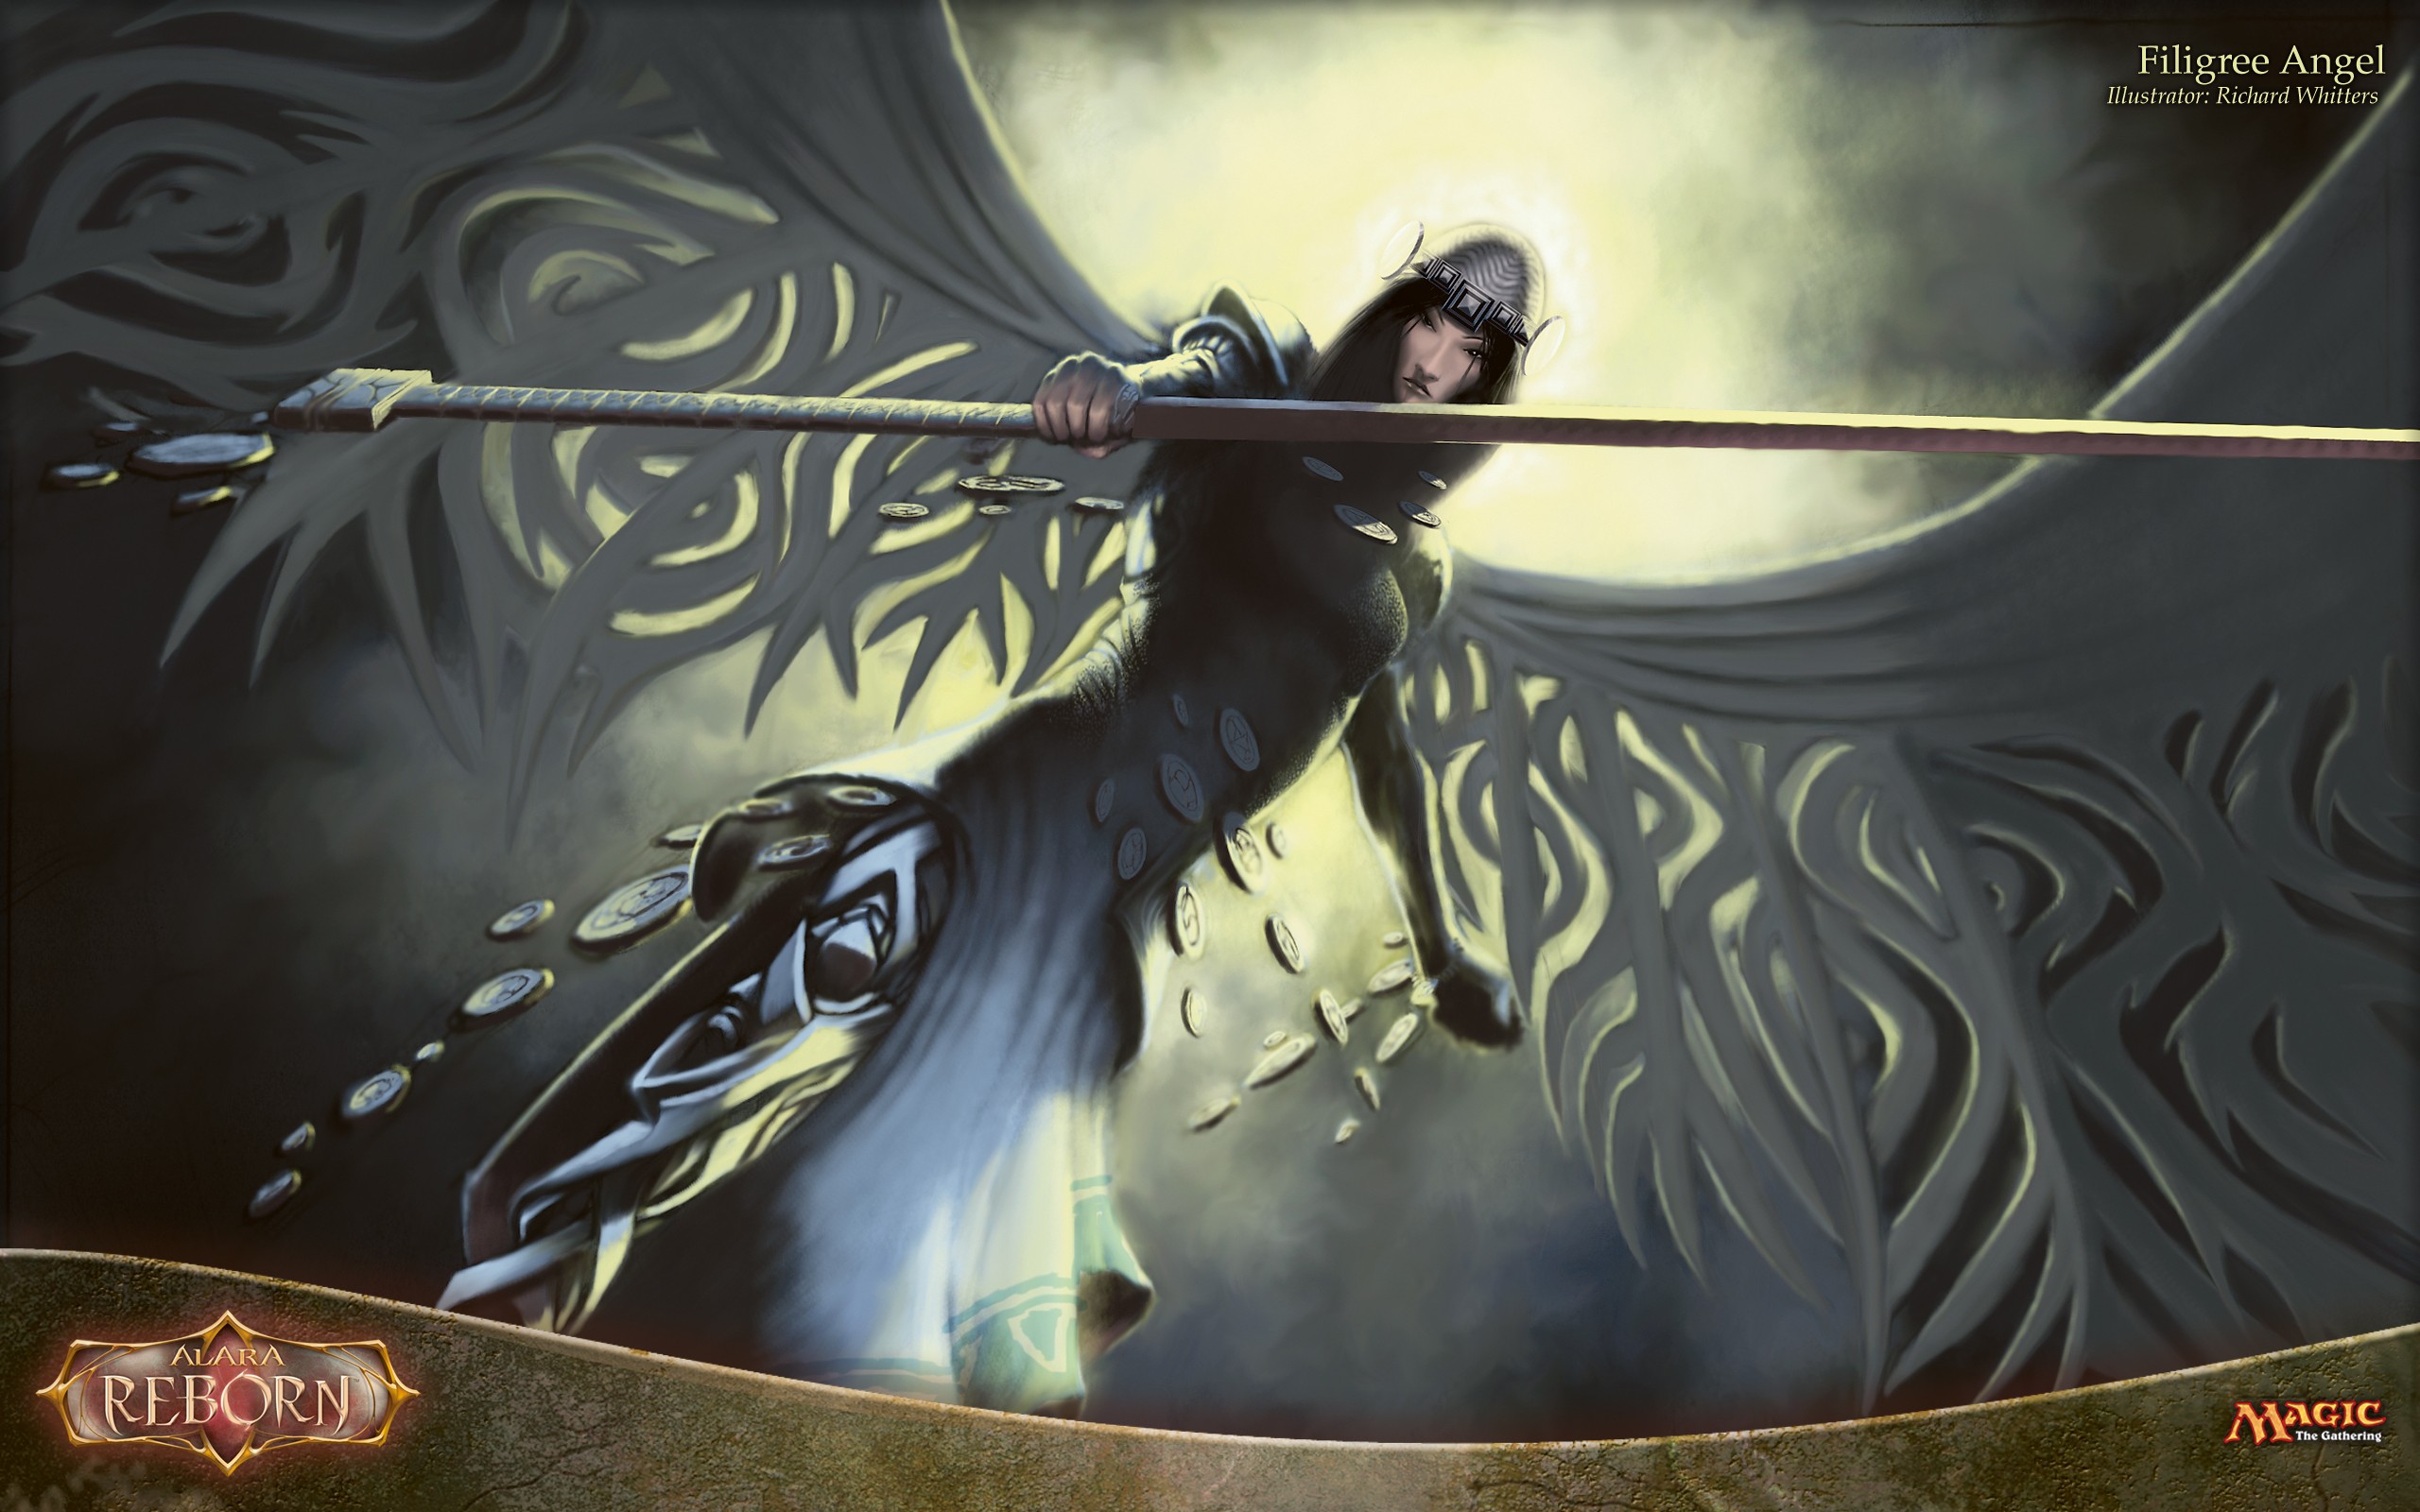 Man Made Magic: The Gathering HD Wallpaper by Richard Whitters